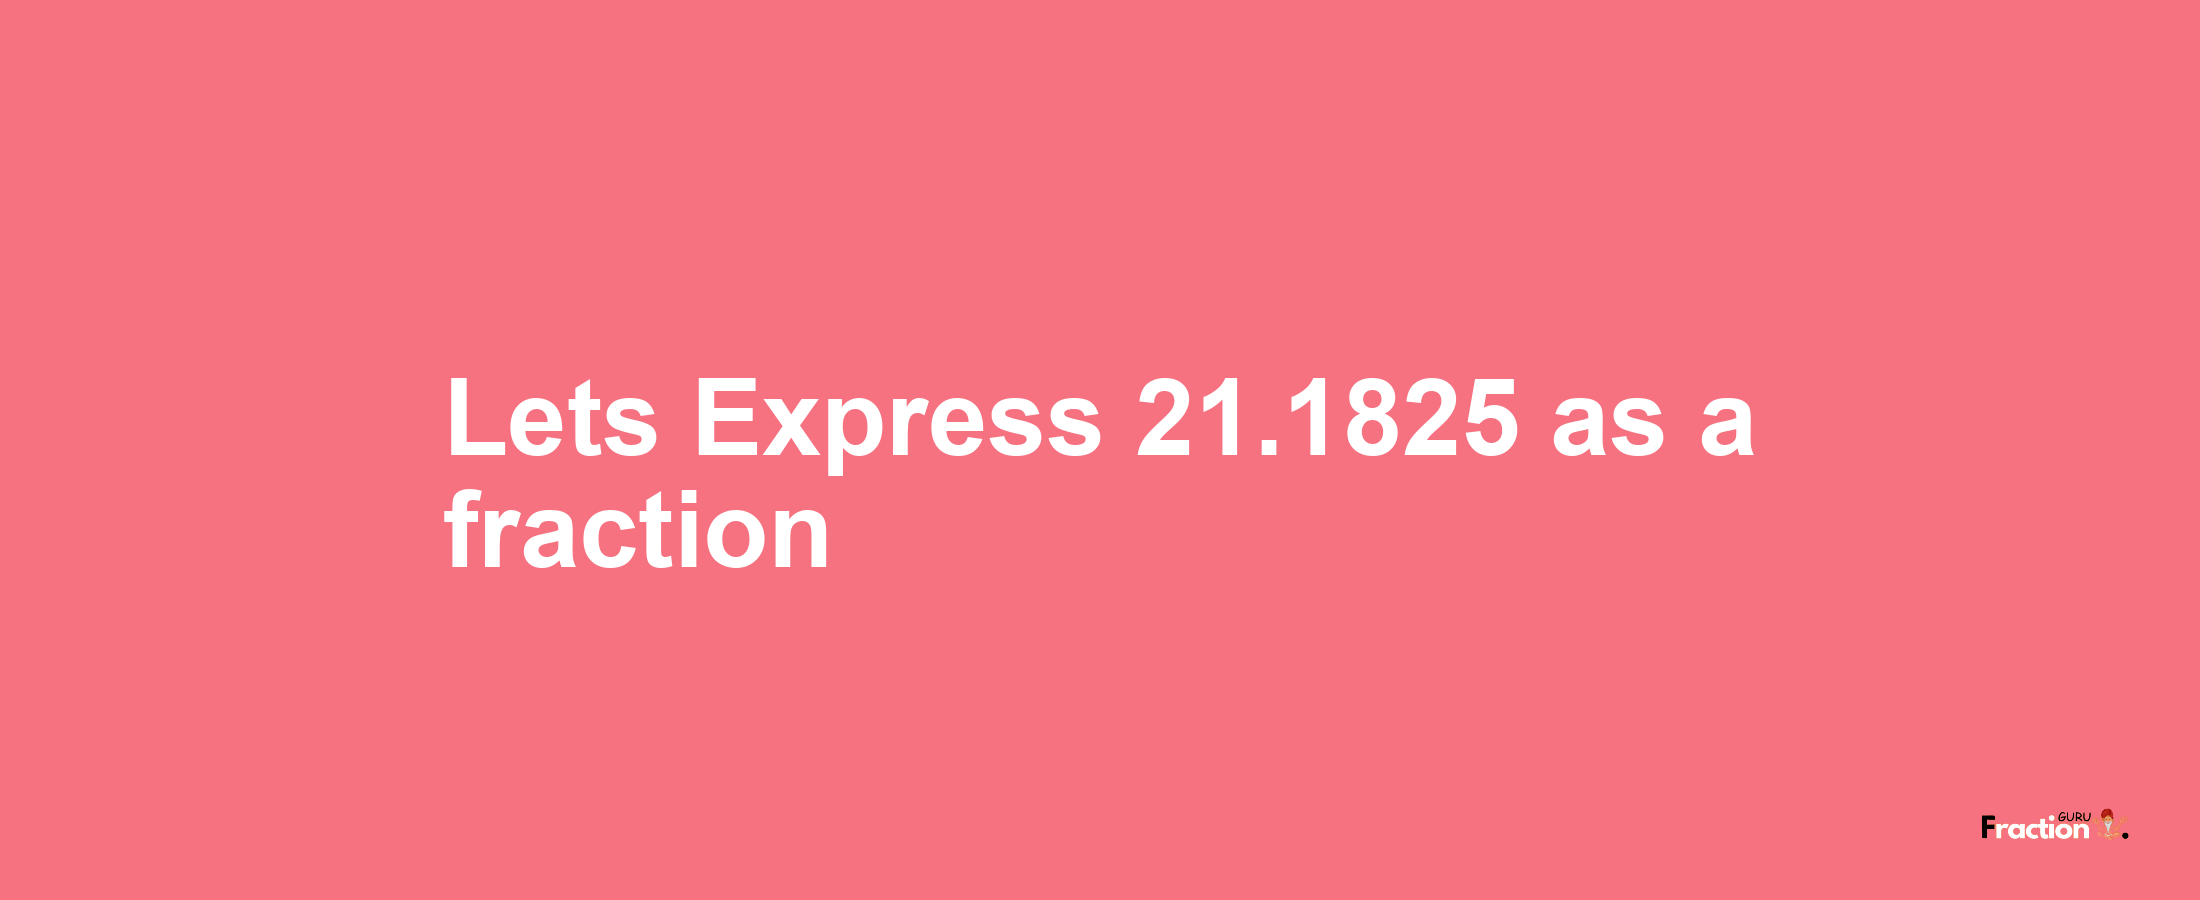 Lets Express 21.1825 as afraction